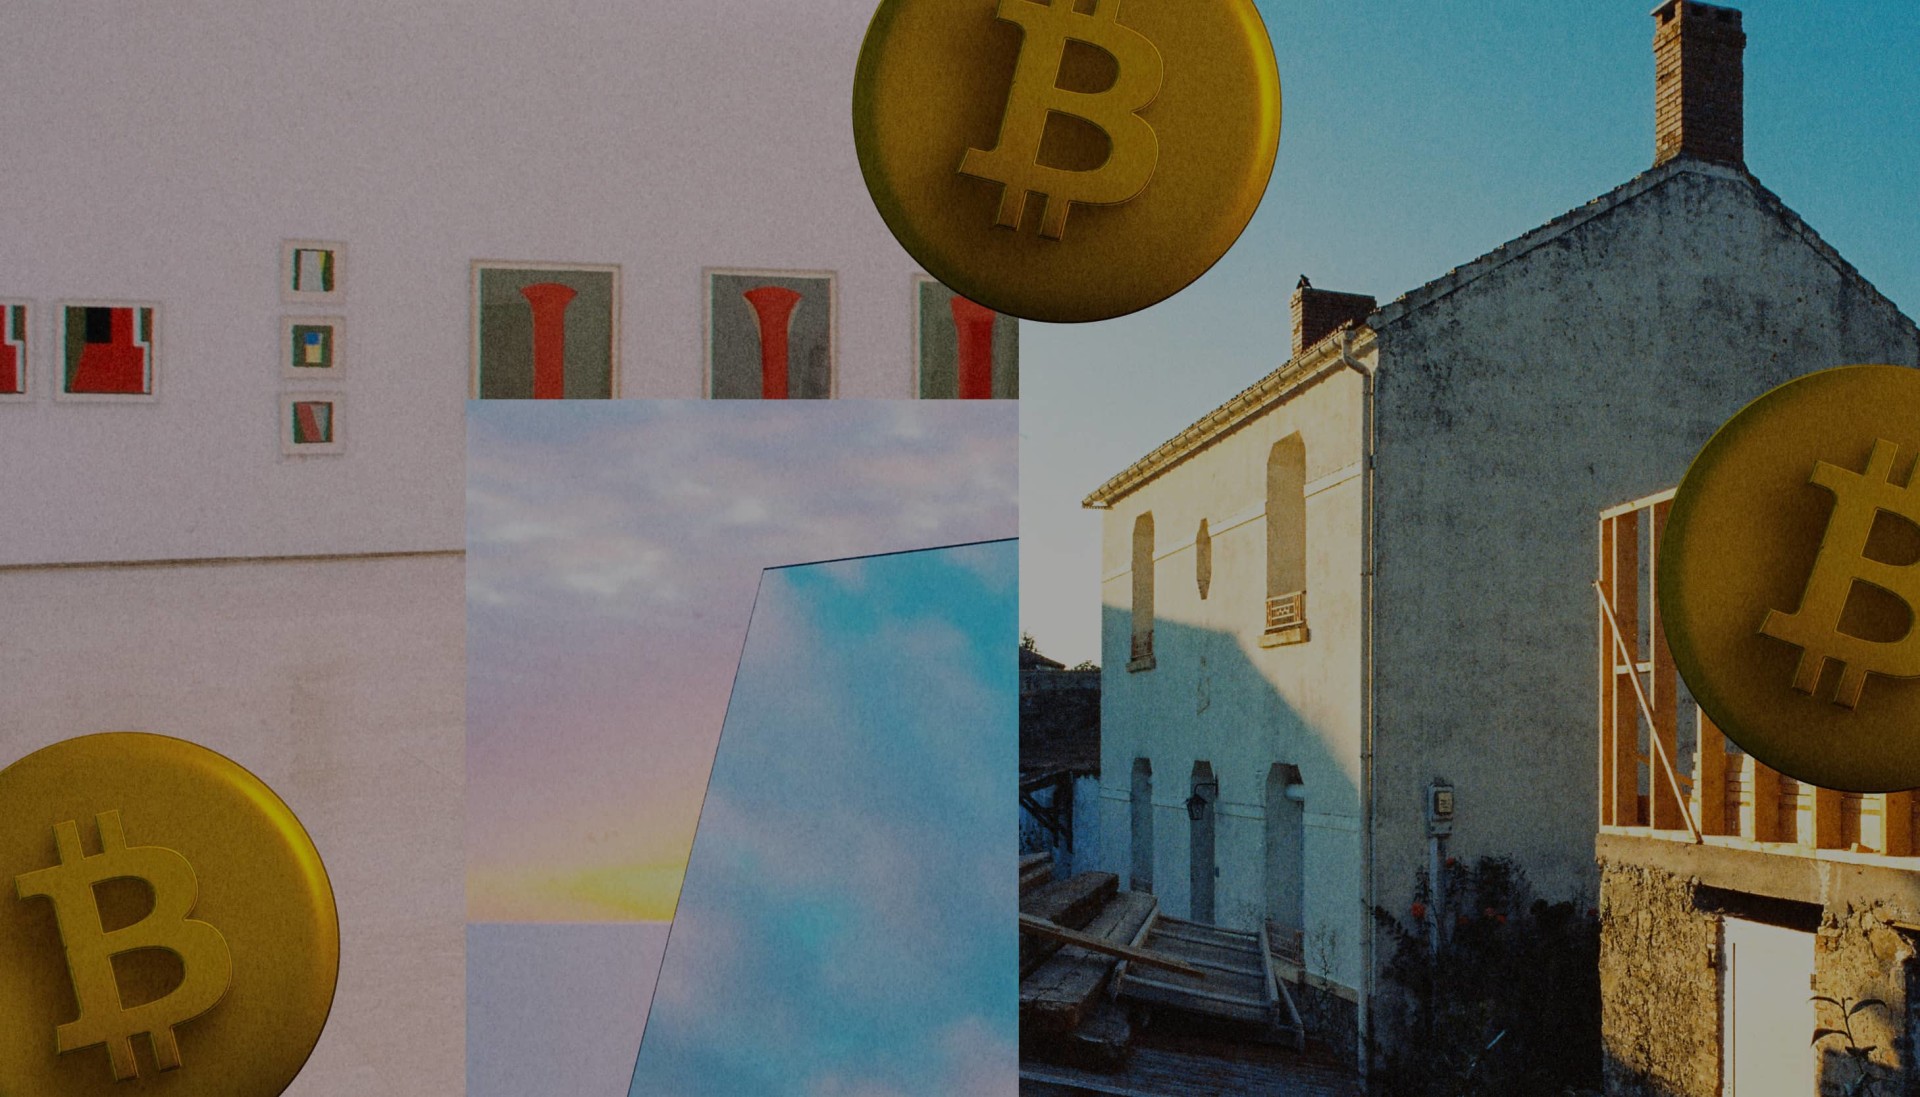 Collage of housed and Bitcoins